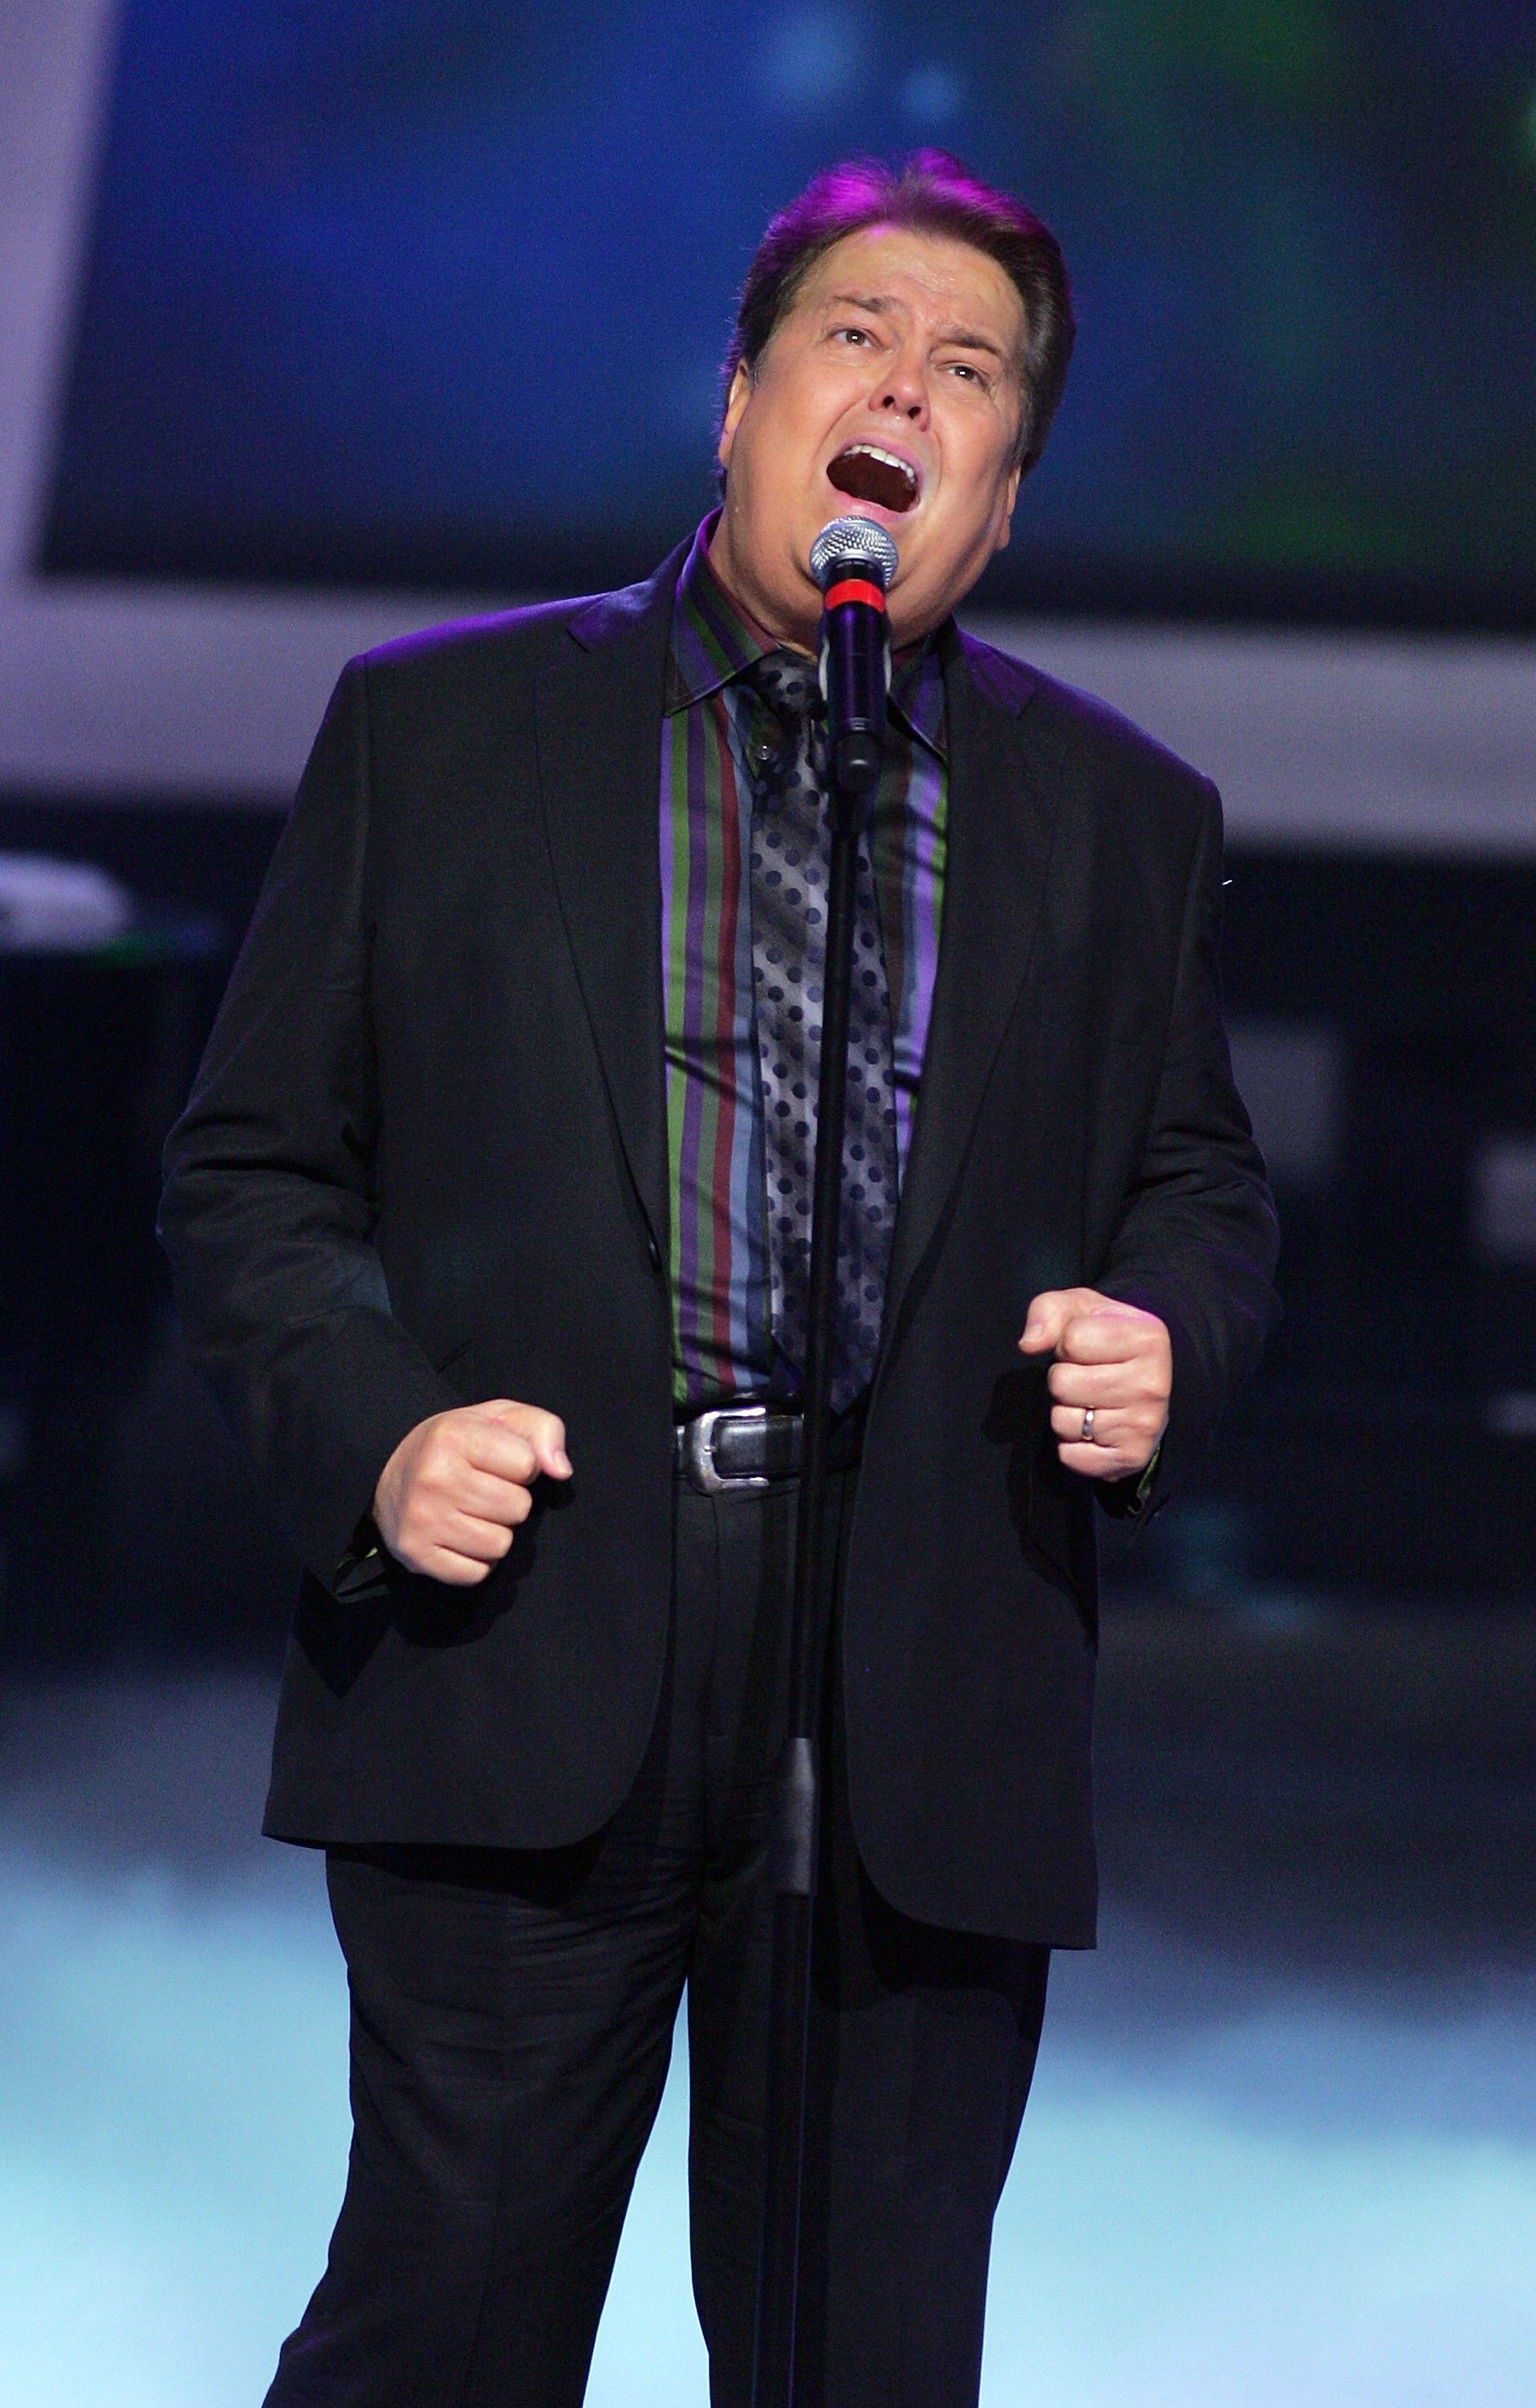 Alan Osmond on August 14, 2007 in Las Vegas, Nevada | Source: Getty Images